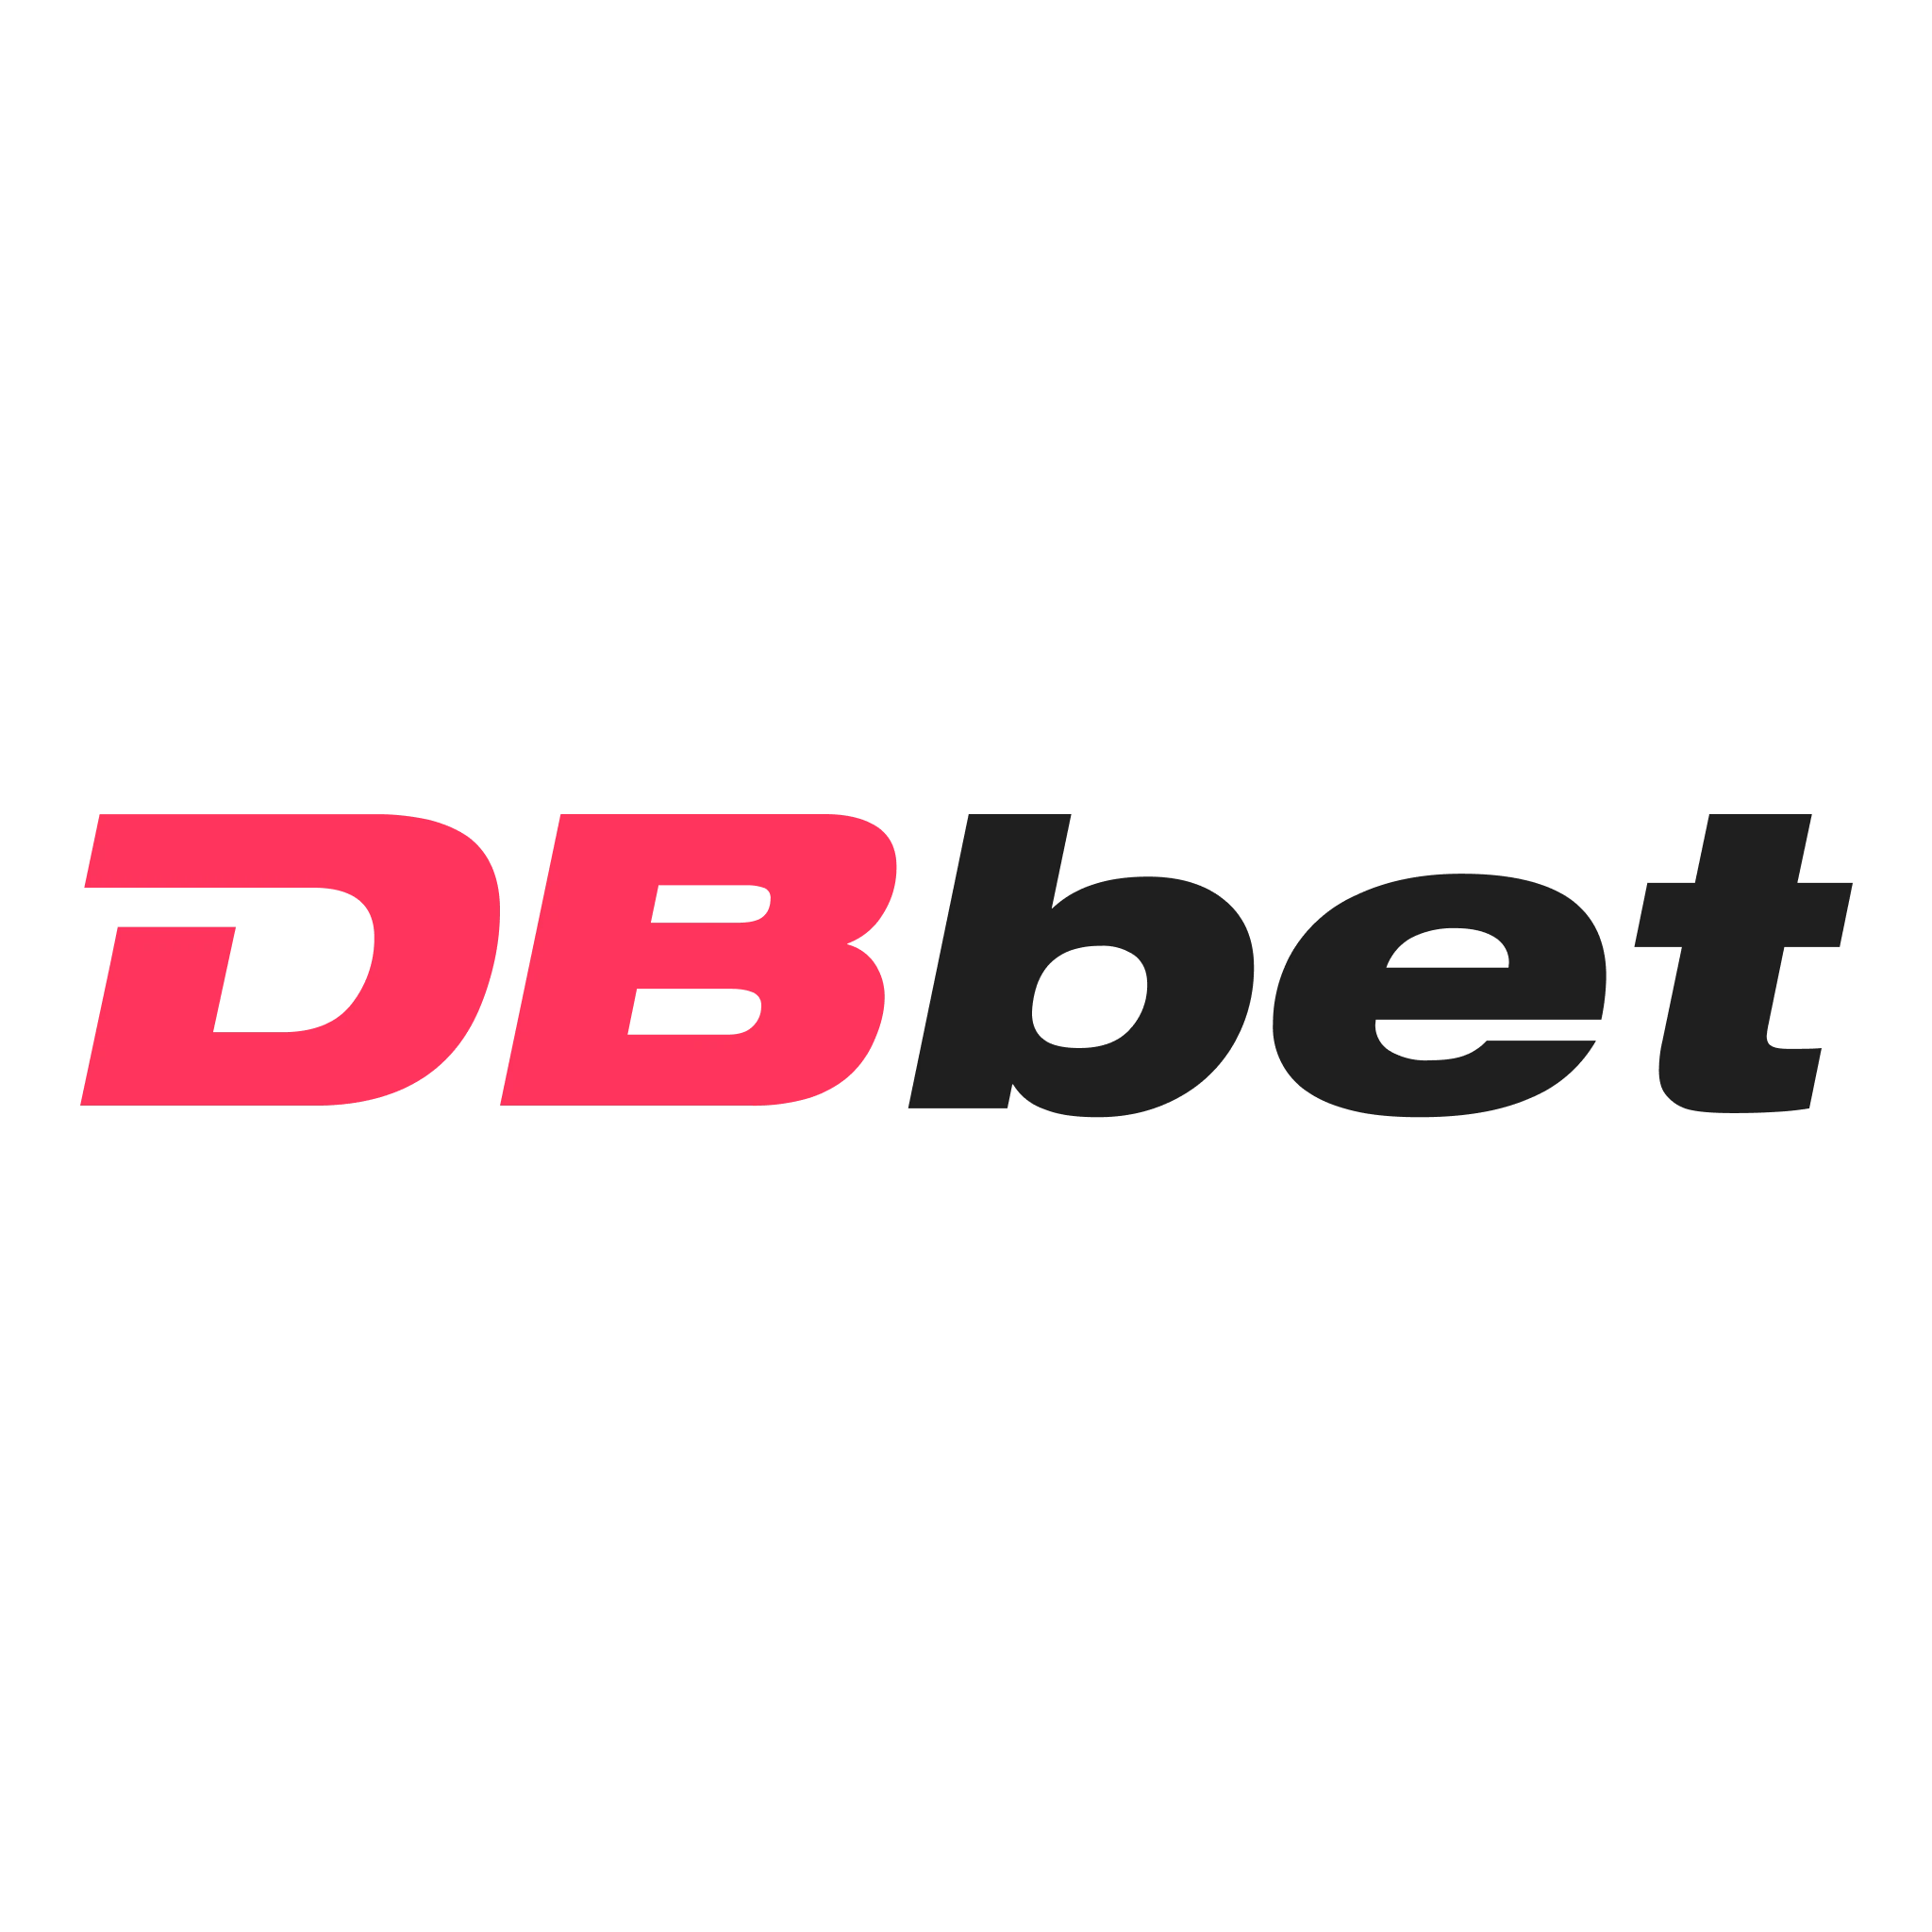 Dbbet is a modern gaming platform that is ready to offer users from India unique cricket markets and bet types.